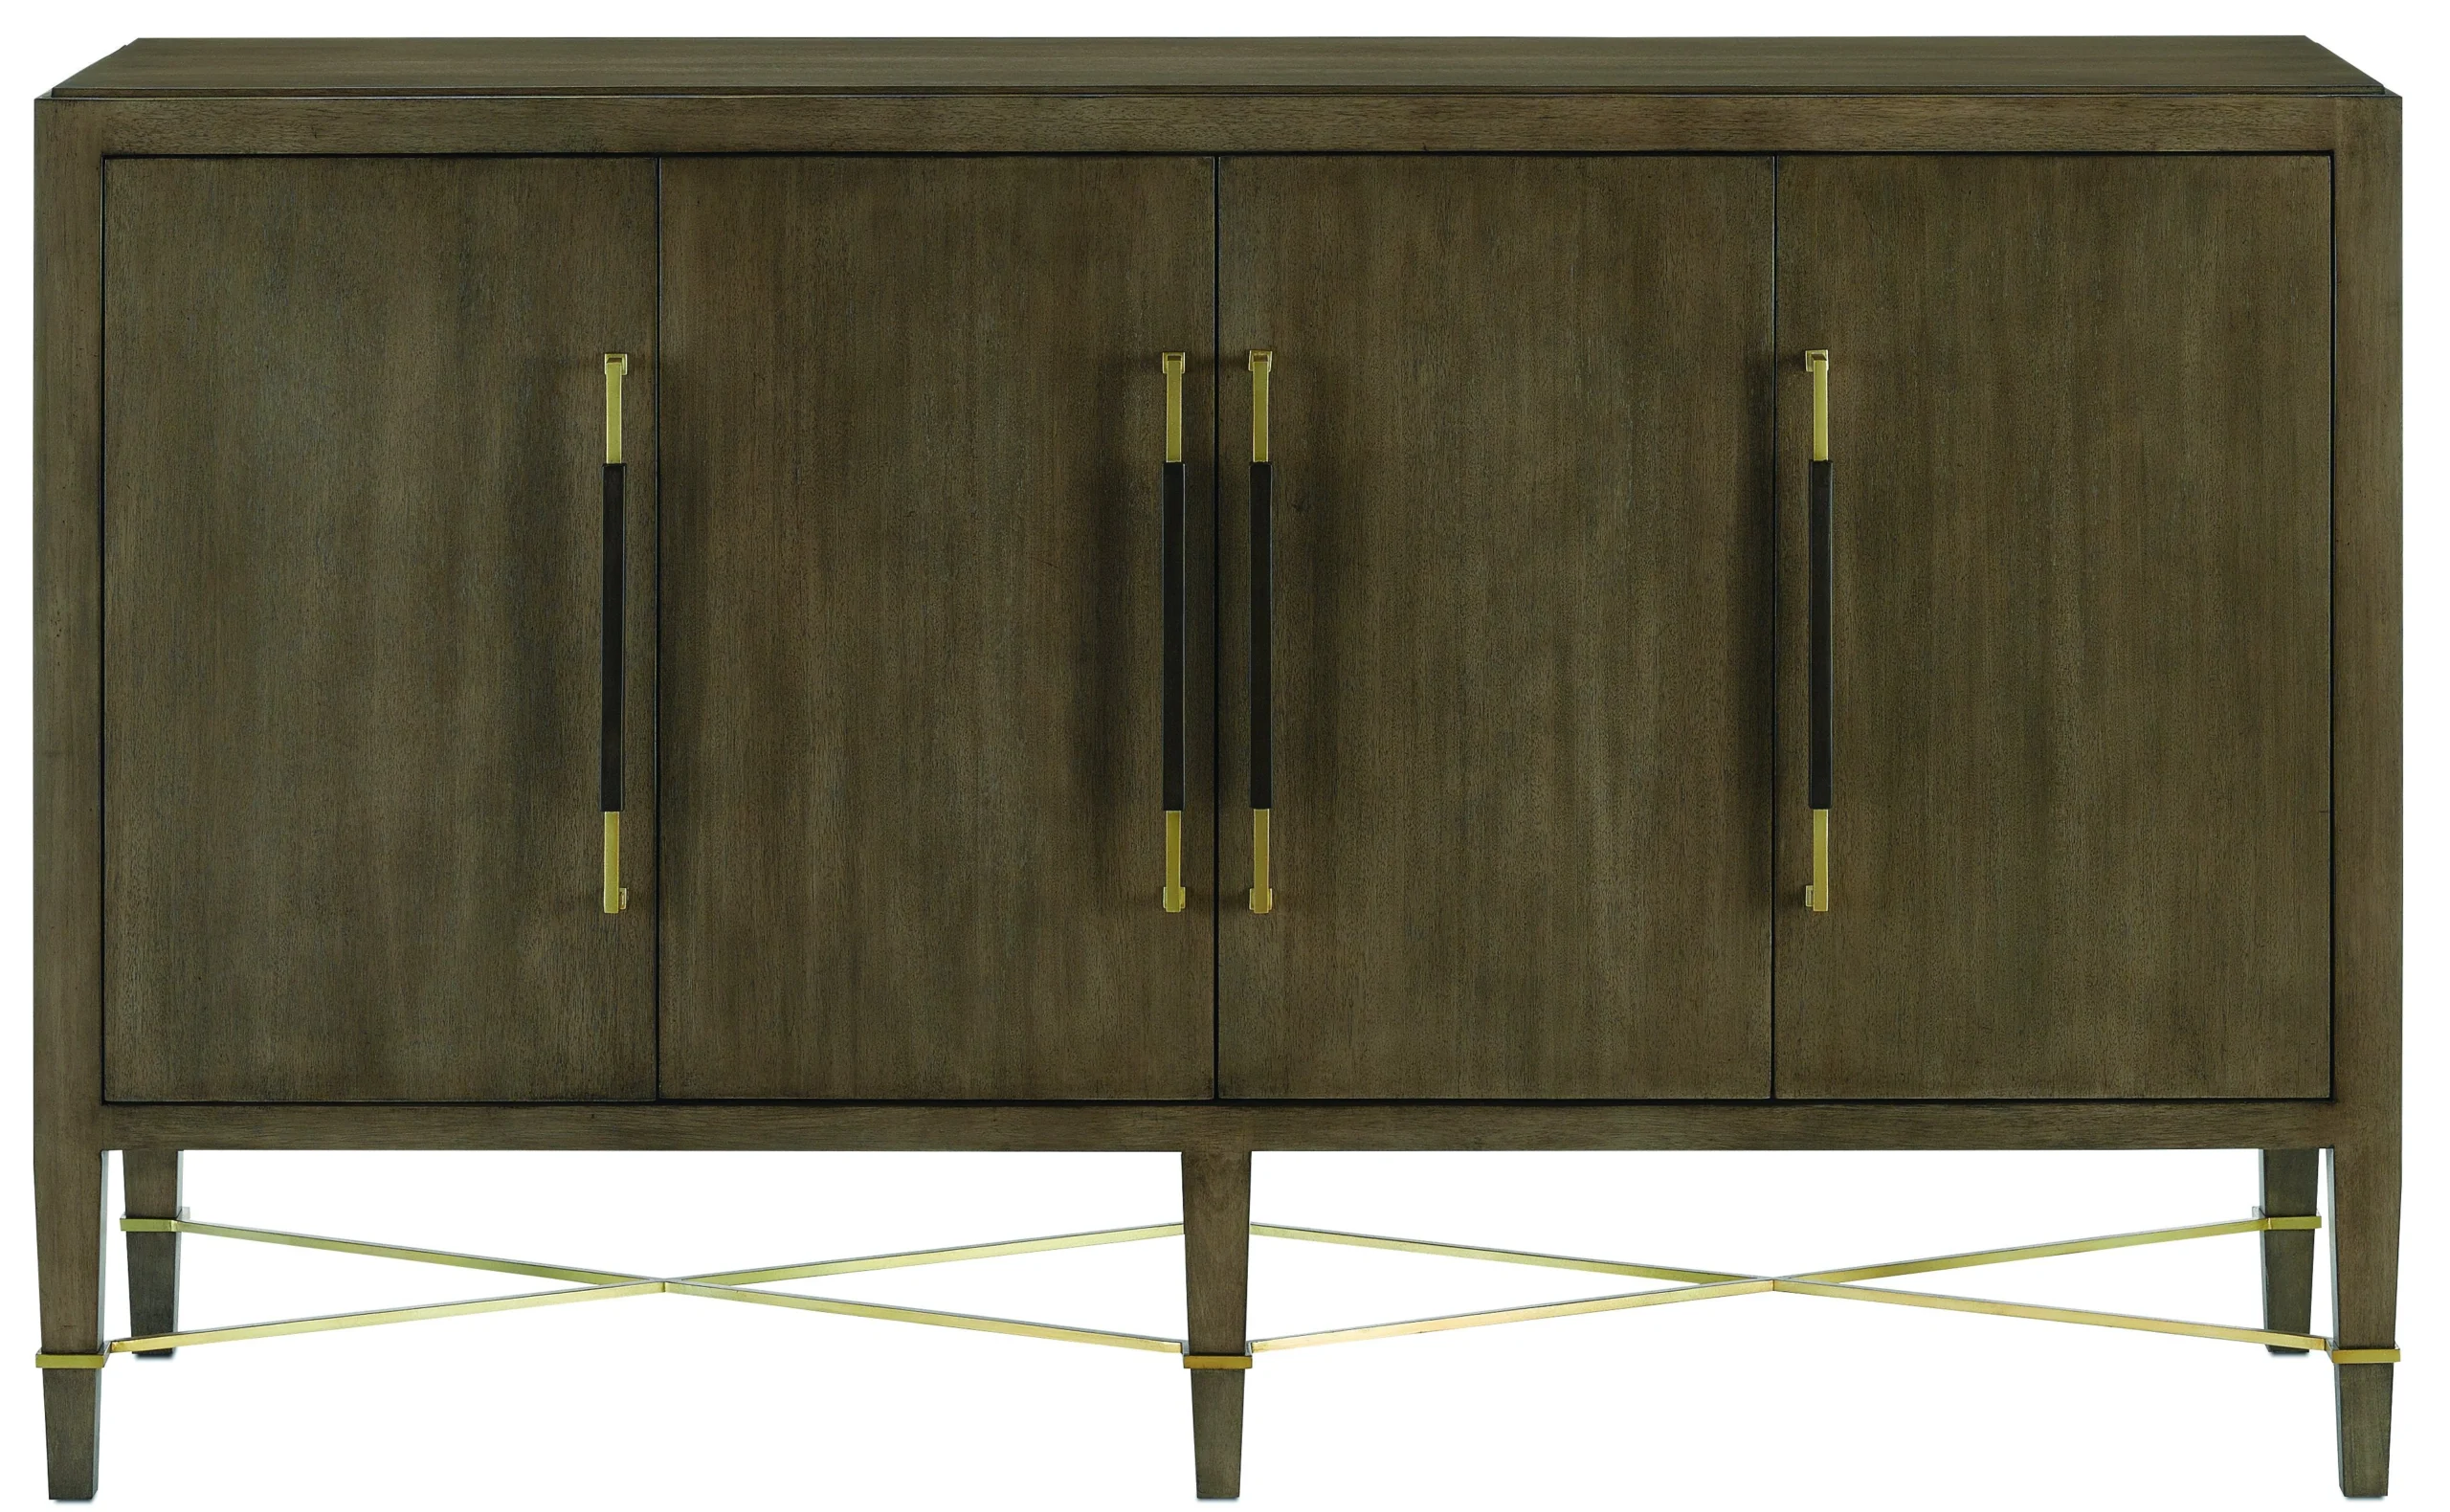 Verona Chanterelle Sideboard design by Currey and Company